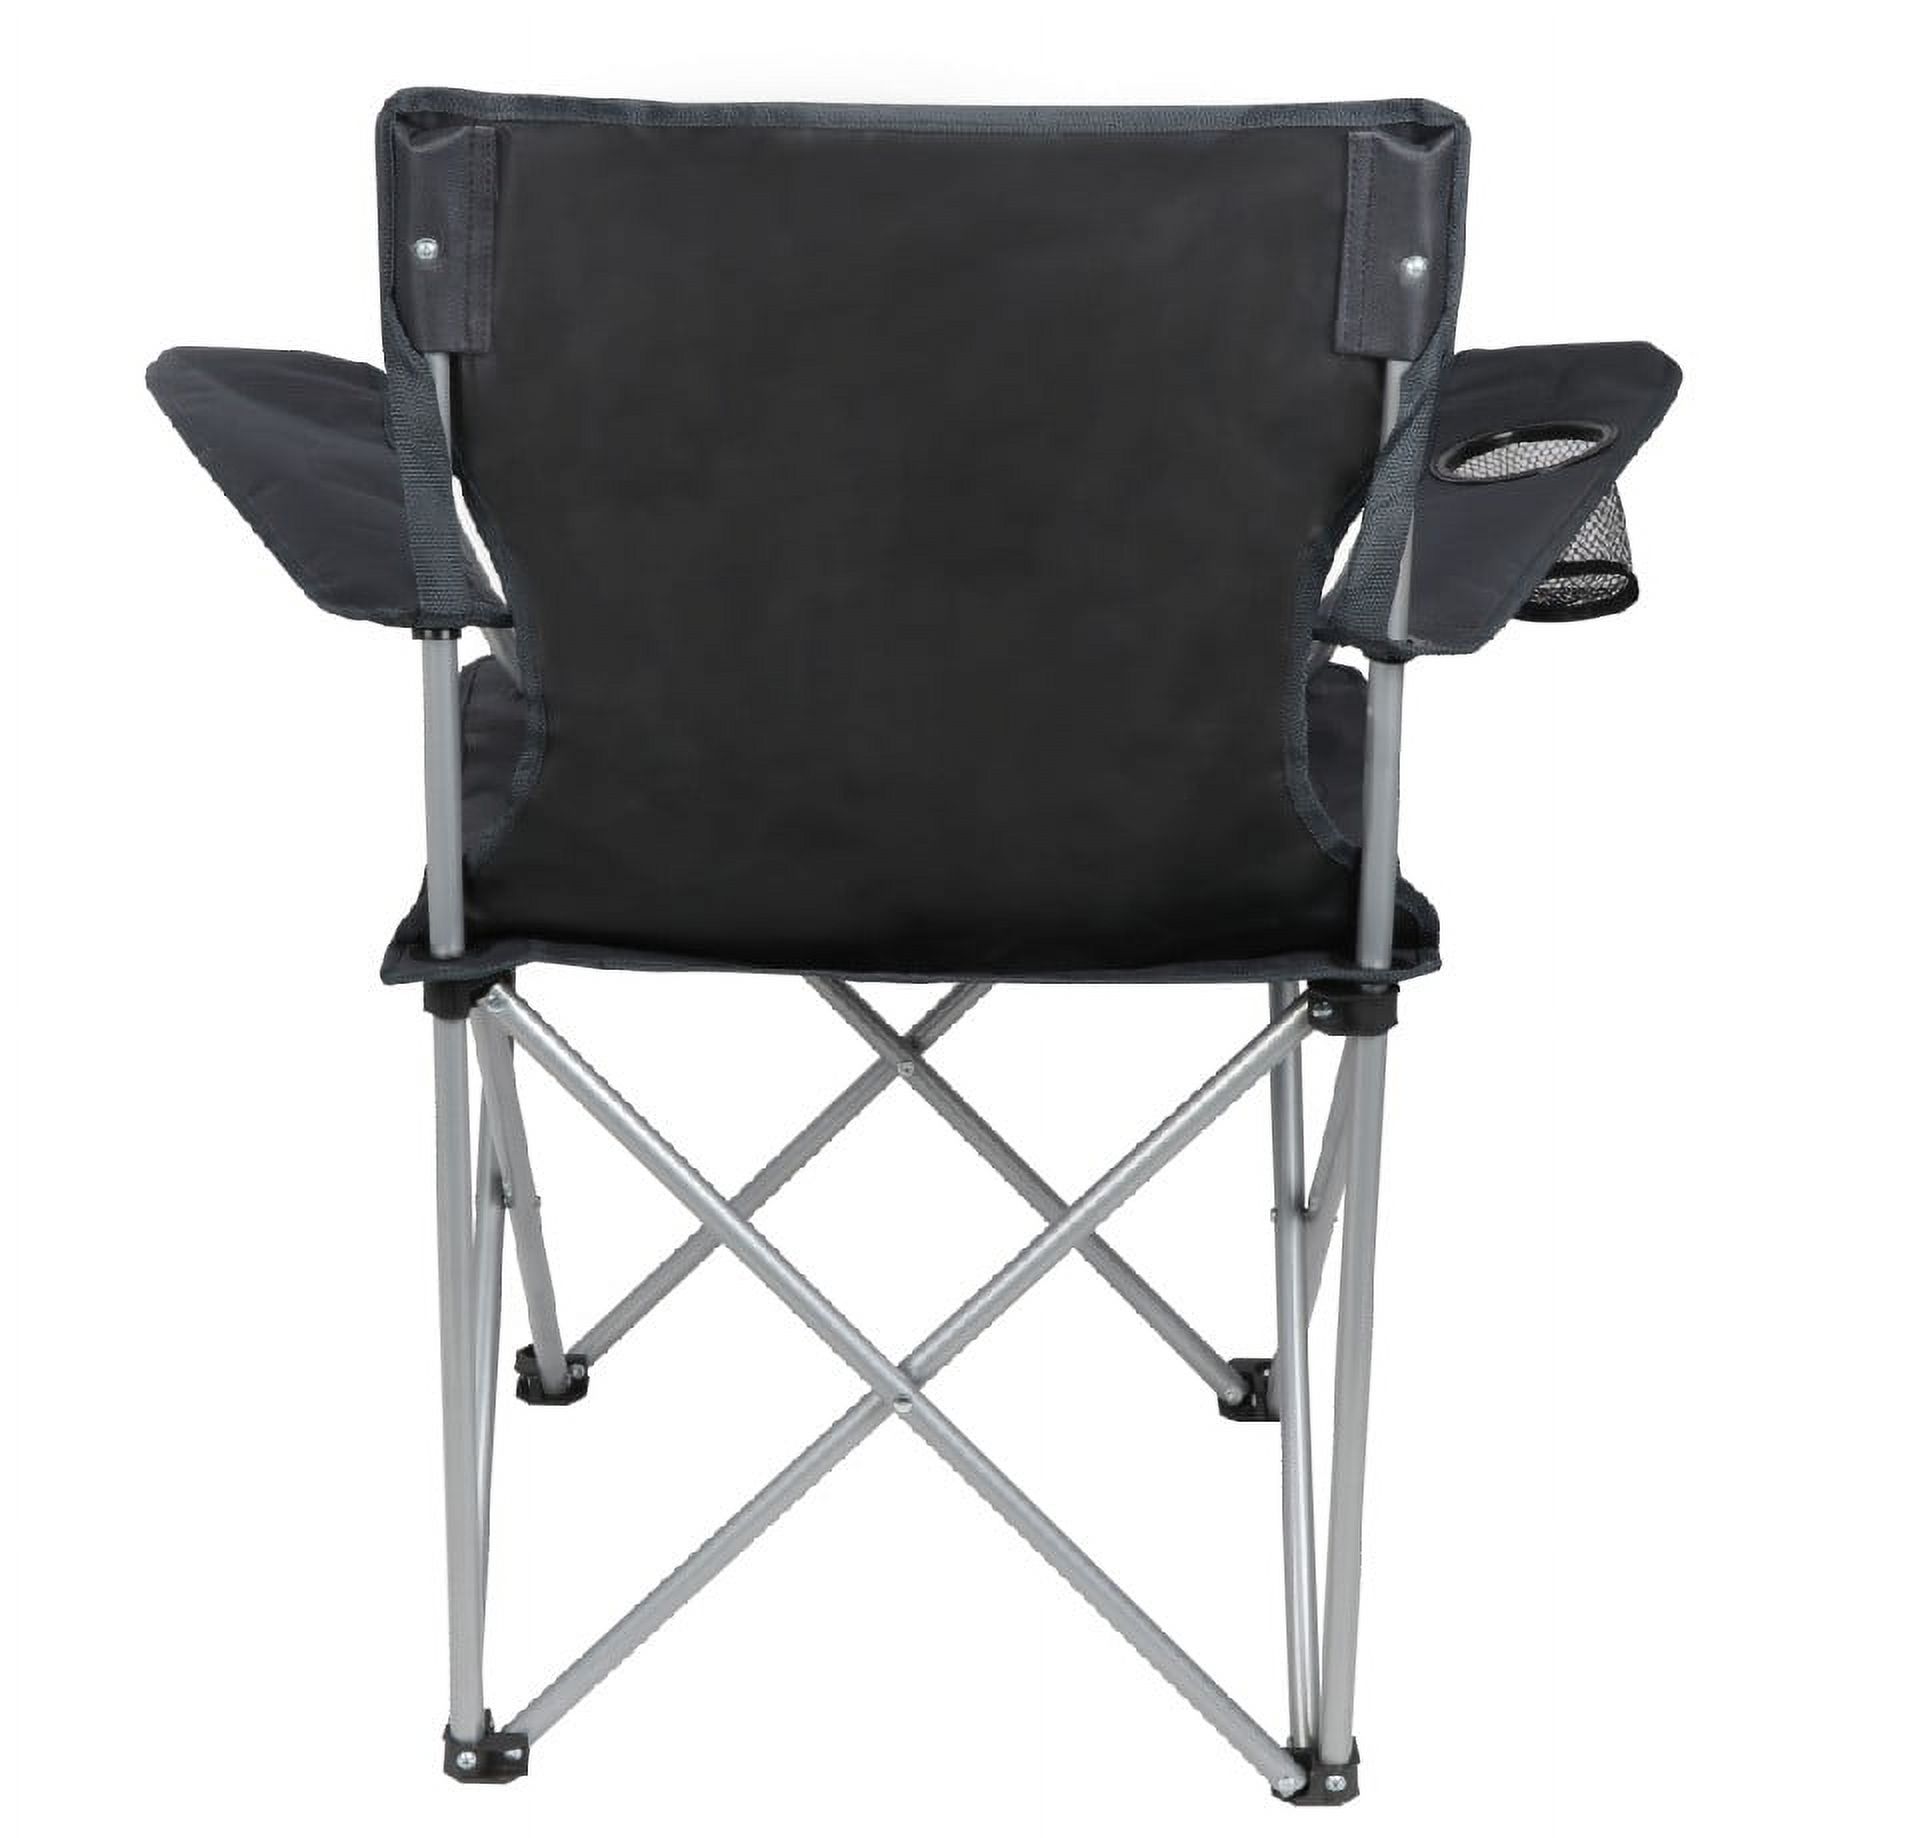 Ozark Trail Adult Basic Quad Folding Camp Chair with Cup Holder, Black - image 5 of 13